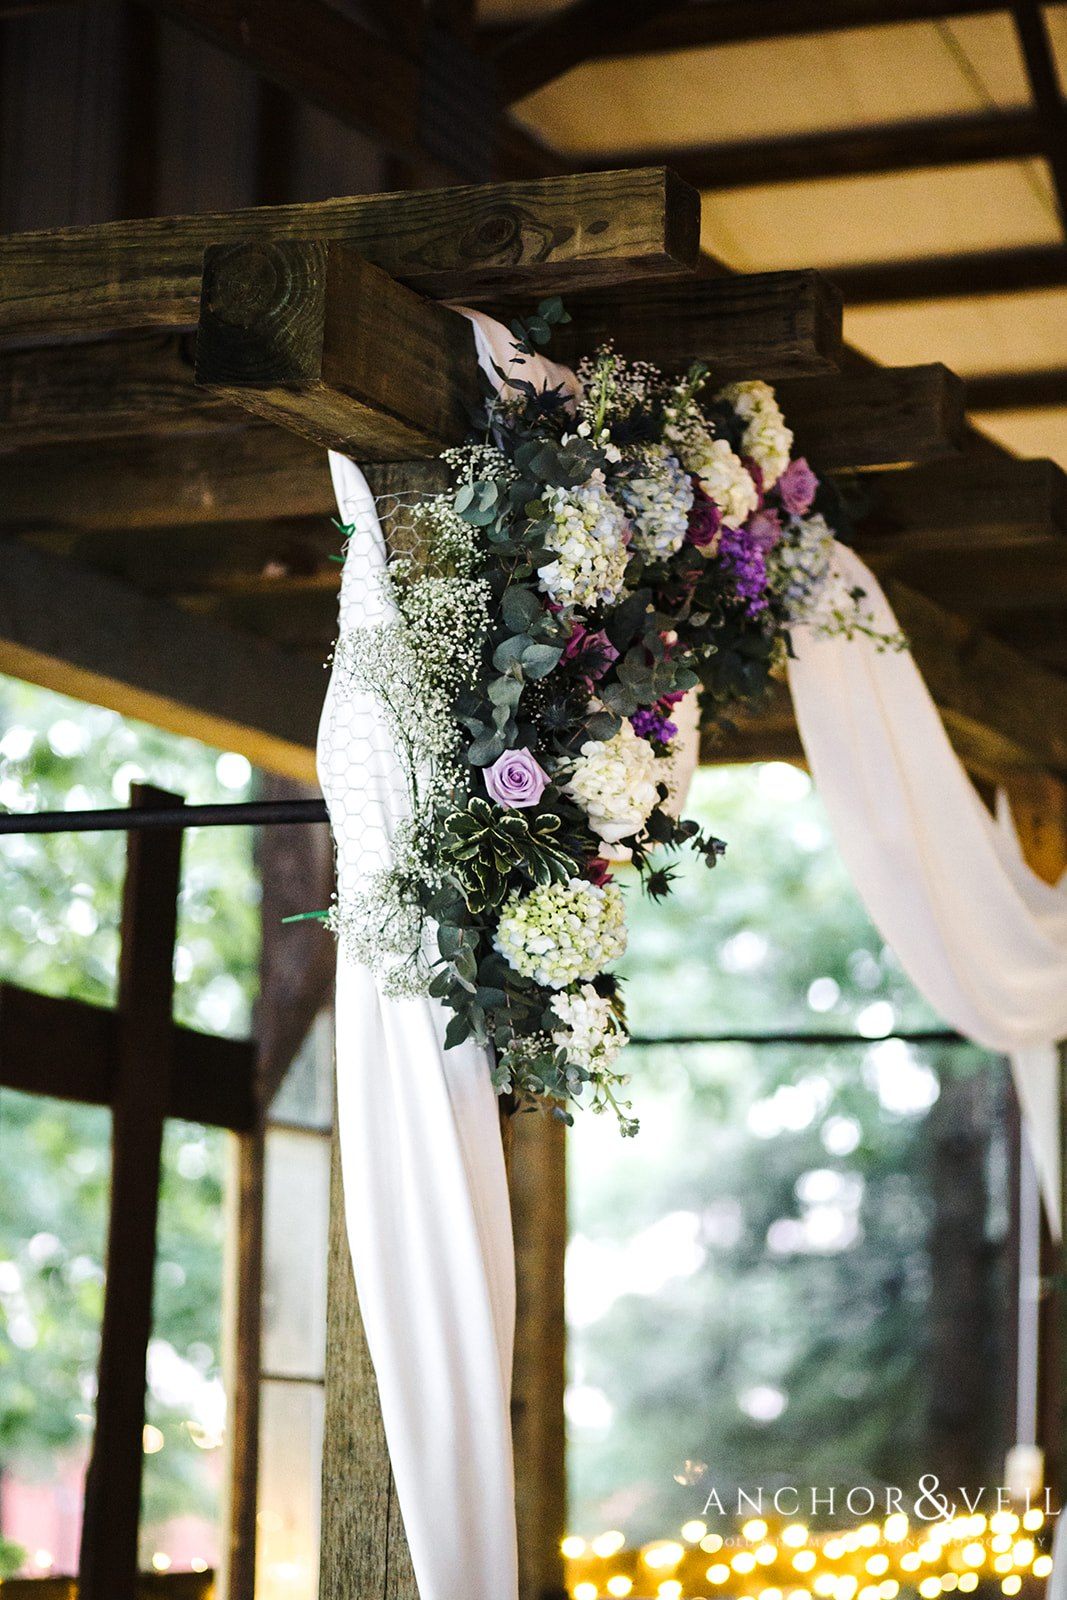 Floral decorating on the archway at The Farm at Brusharbor Wedding